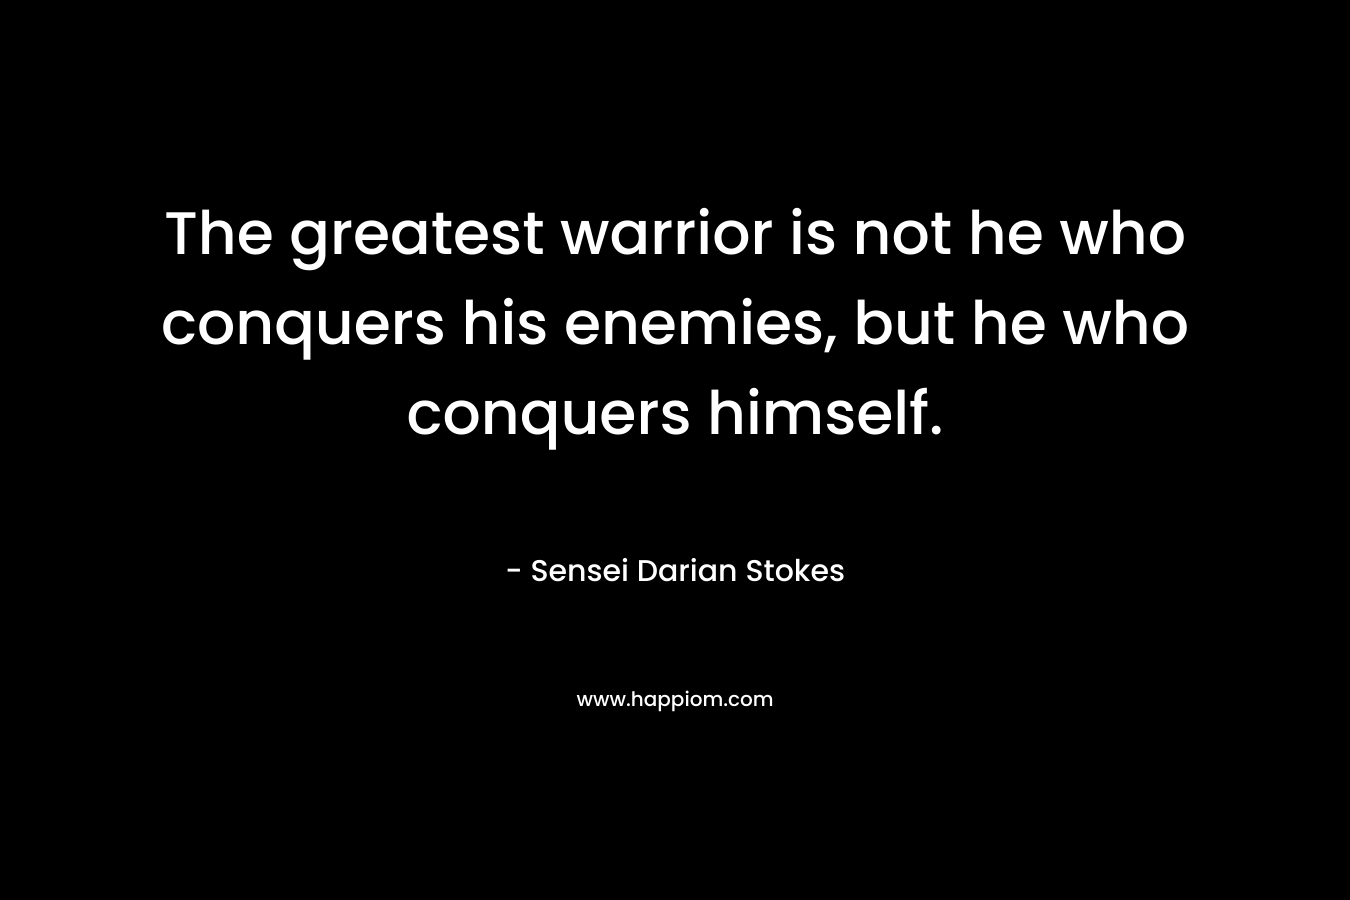 The greatest warrior is not he who conquers his enemies, but he who conquers himself.